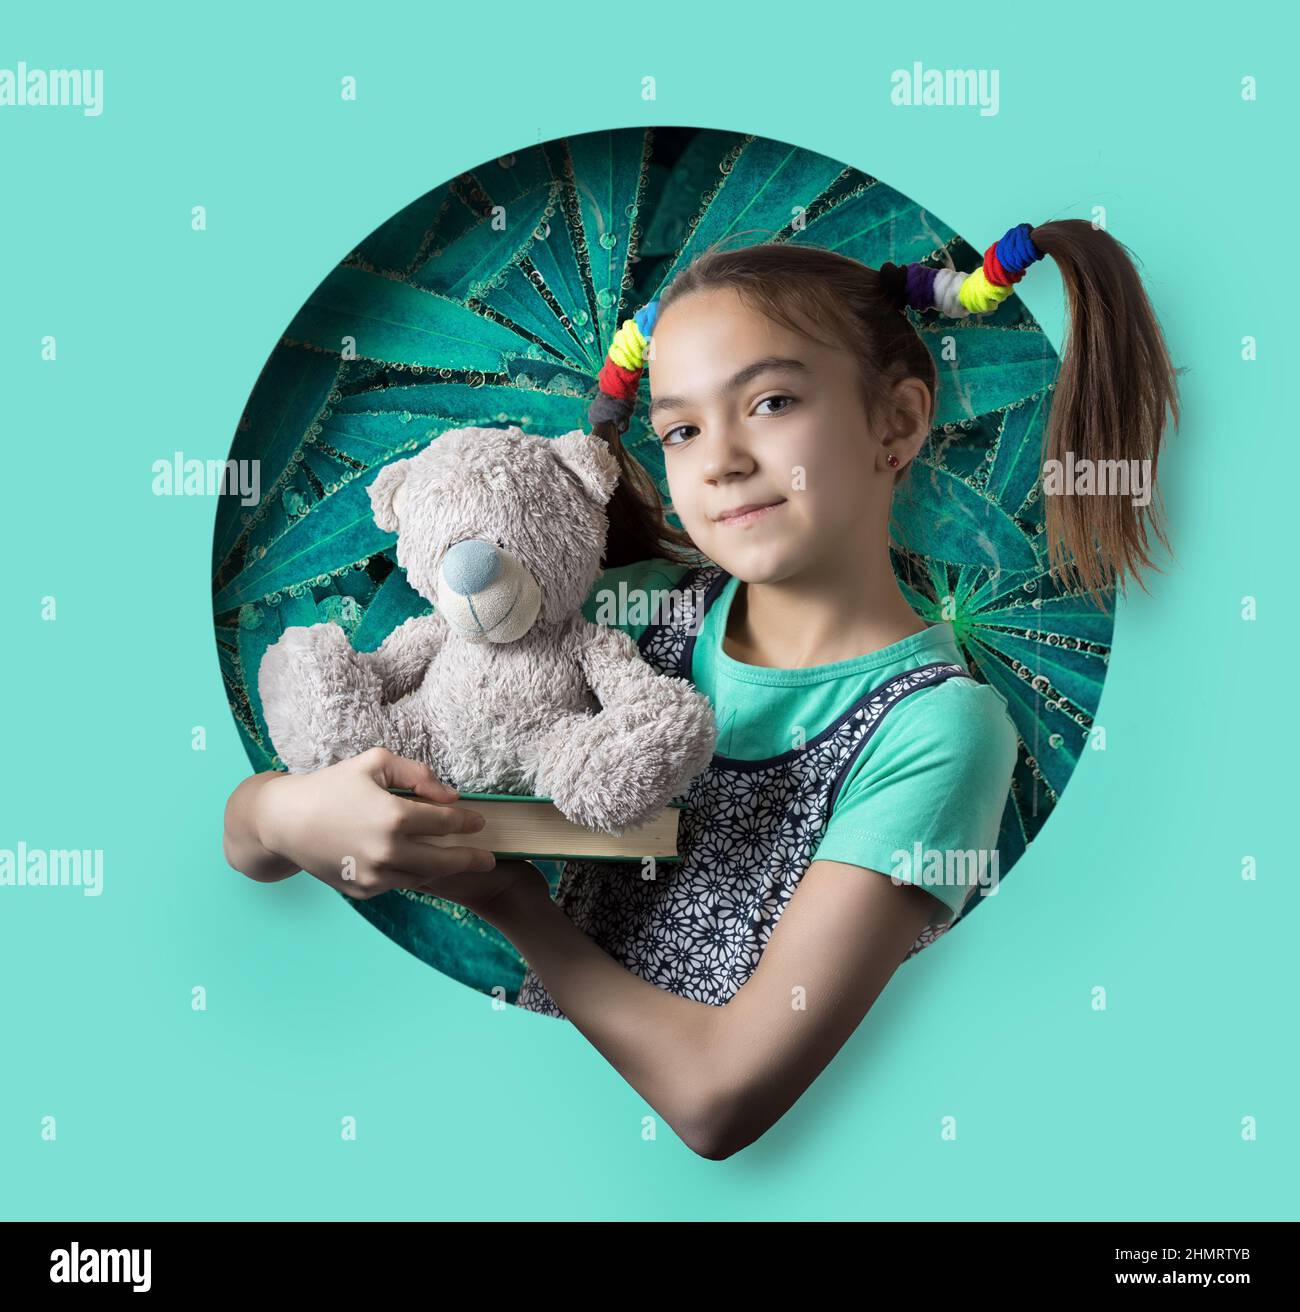 Happy 11 year old girl with funny ponytails holds a book and teddy bear and peeks out of a round hole in paper Stock Photo